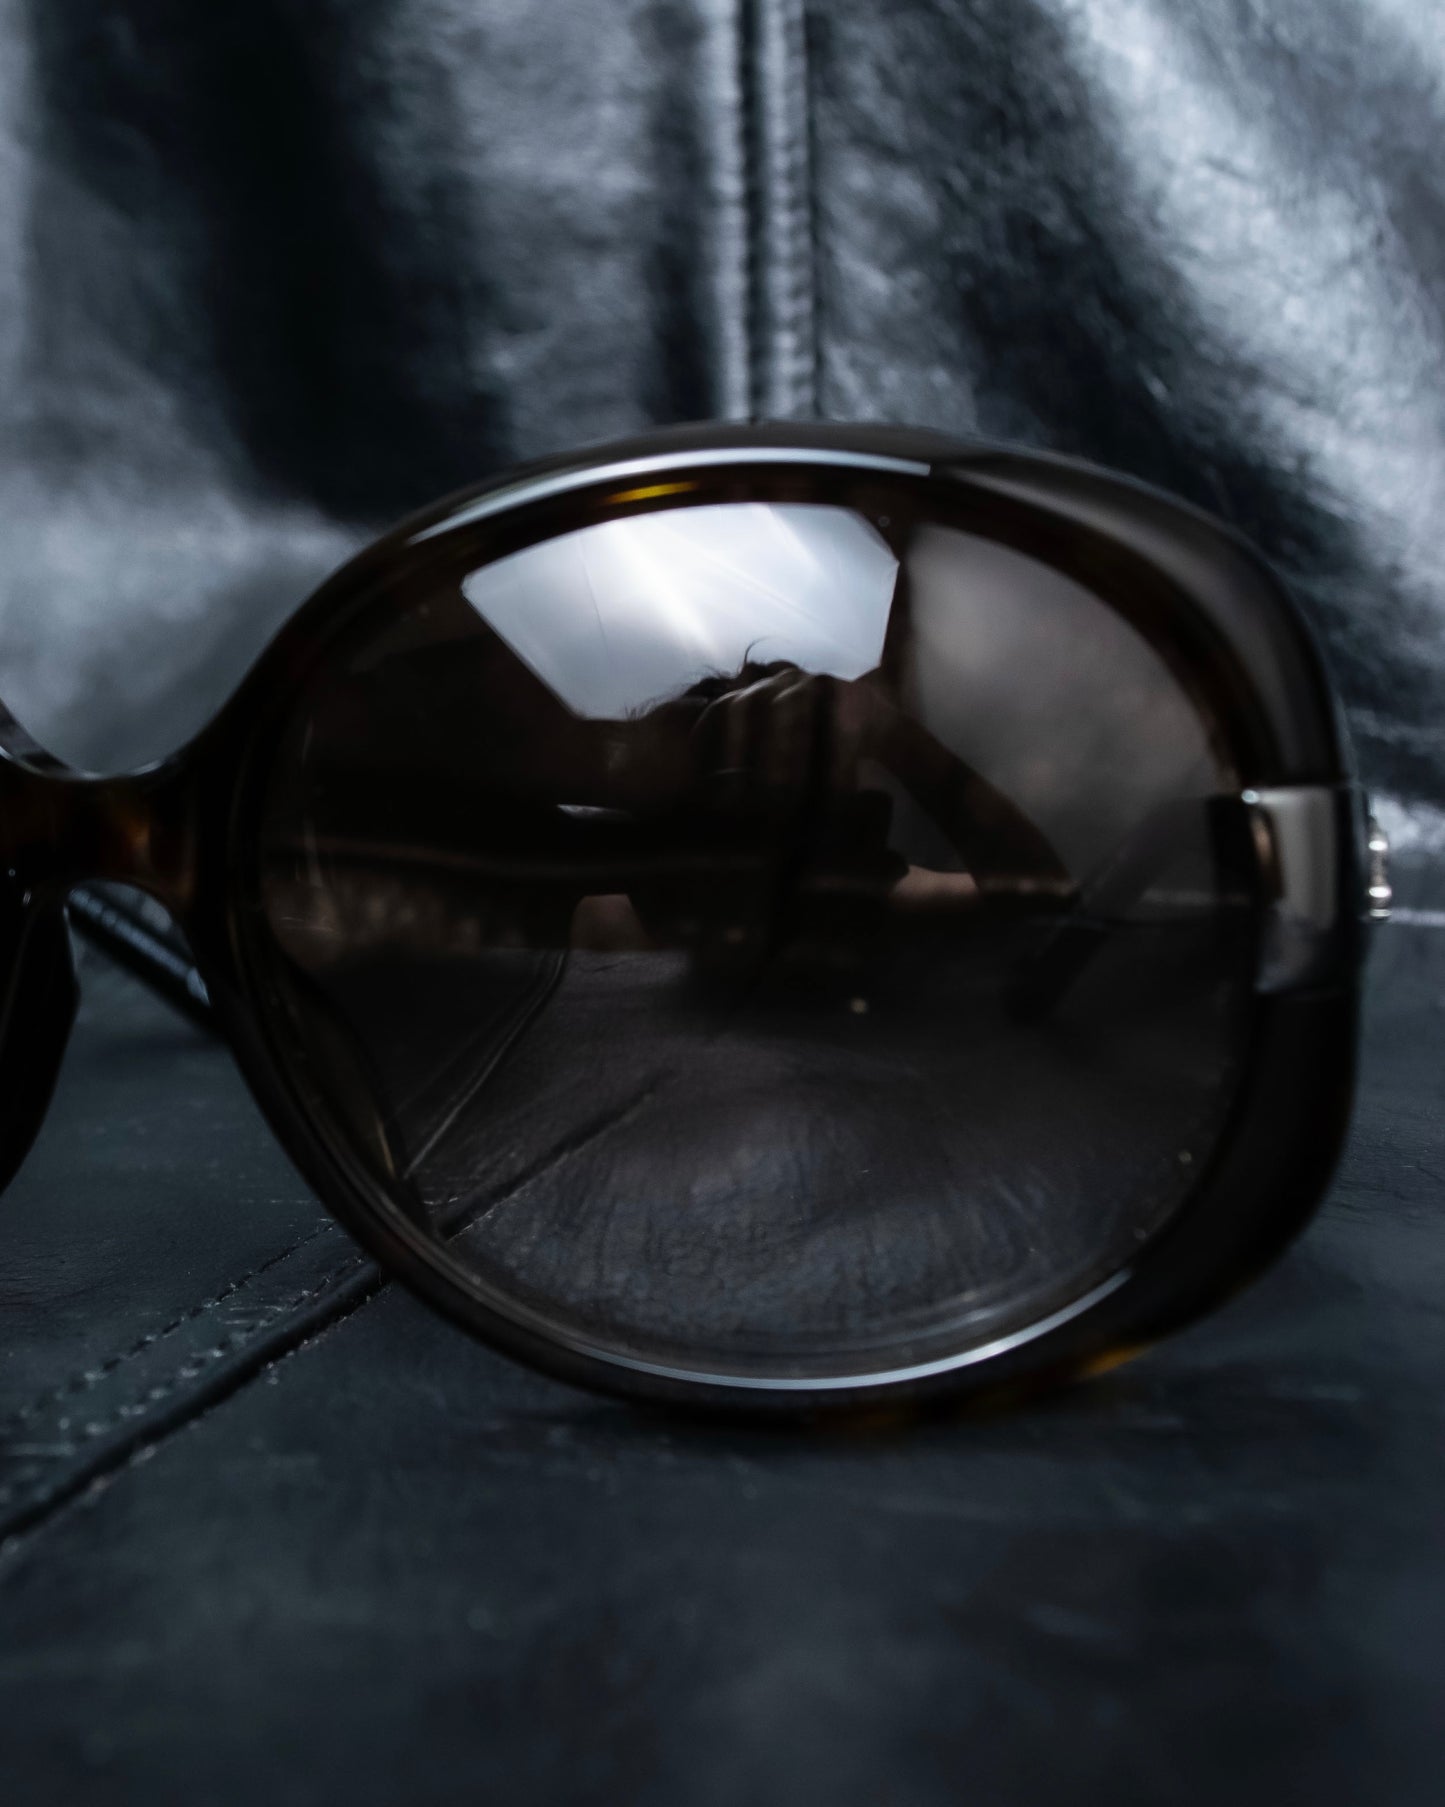 "GUCCI"Butterfly frame gradient lens sunglasses